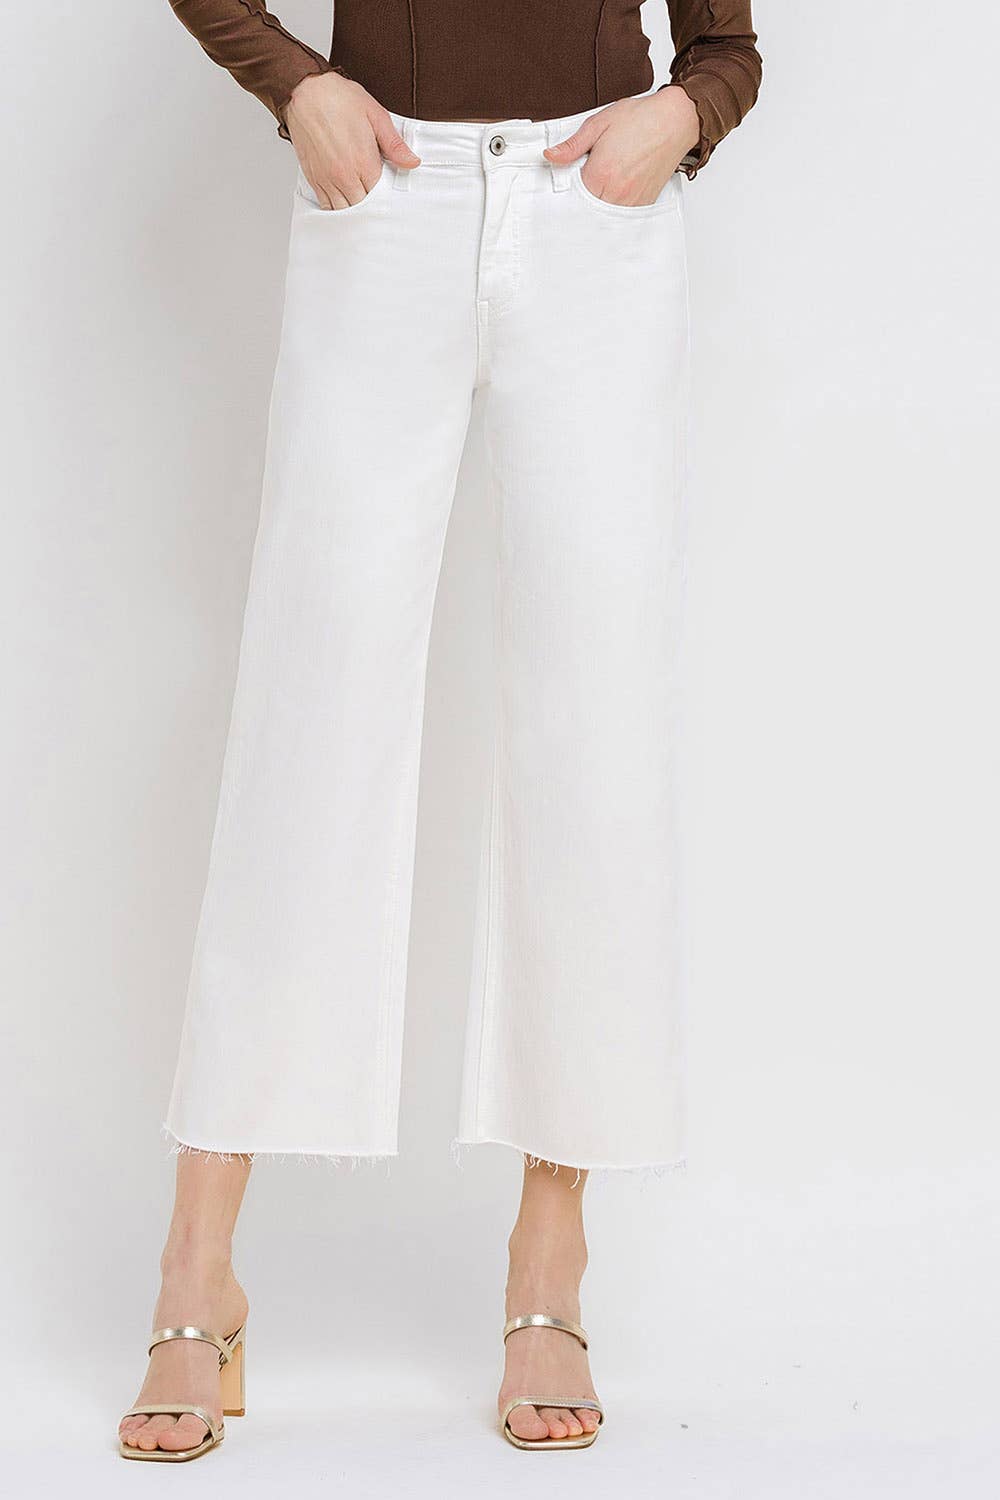 VERVET by FLYING MONKEY - HIGH RISE CROP WIDE LEG JEANS T5894WH: OPTIC WHITE / 30